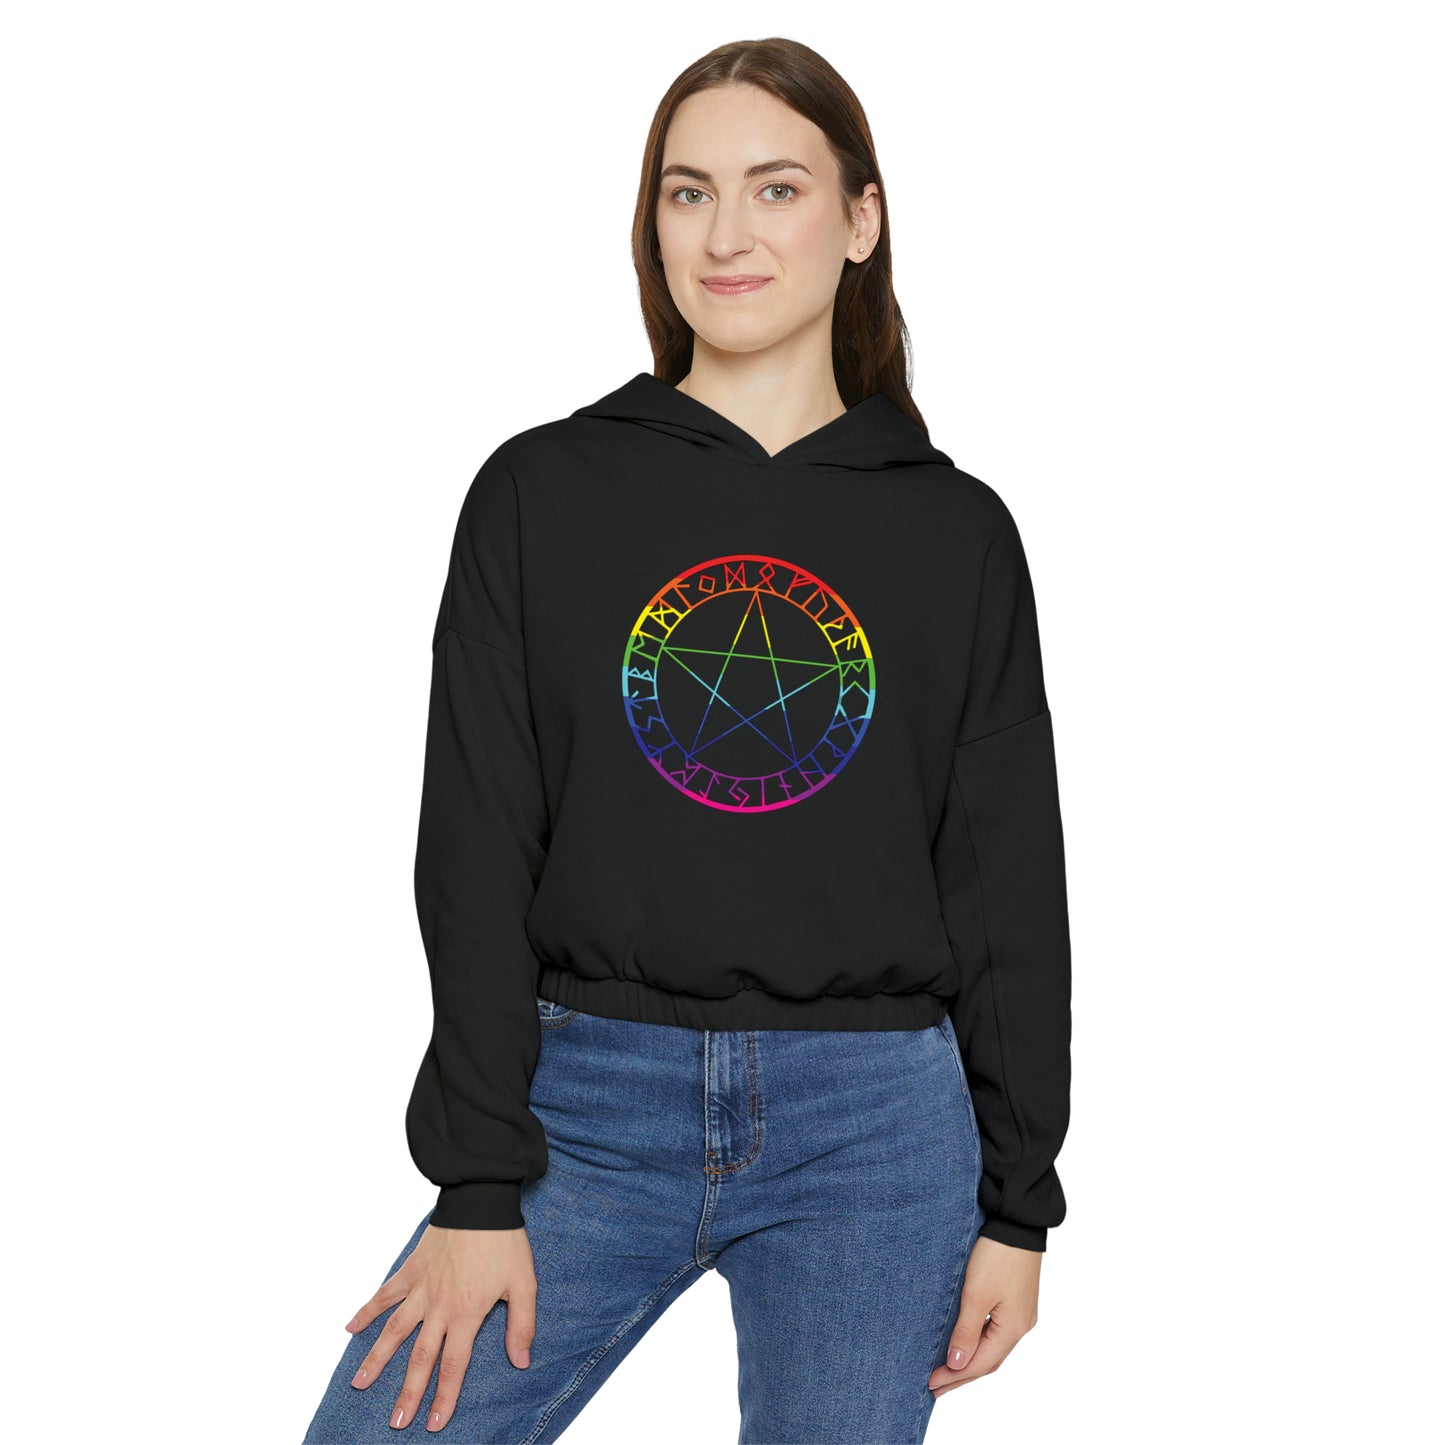 Spellcaster by Patti Negri "Witch" Rainbow Women's Cinched Bottom Hoodie